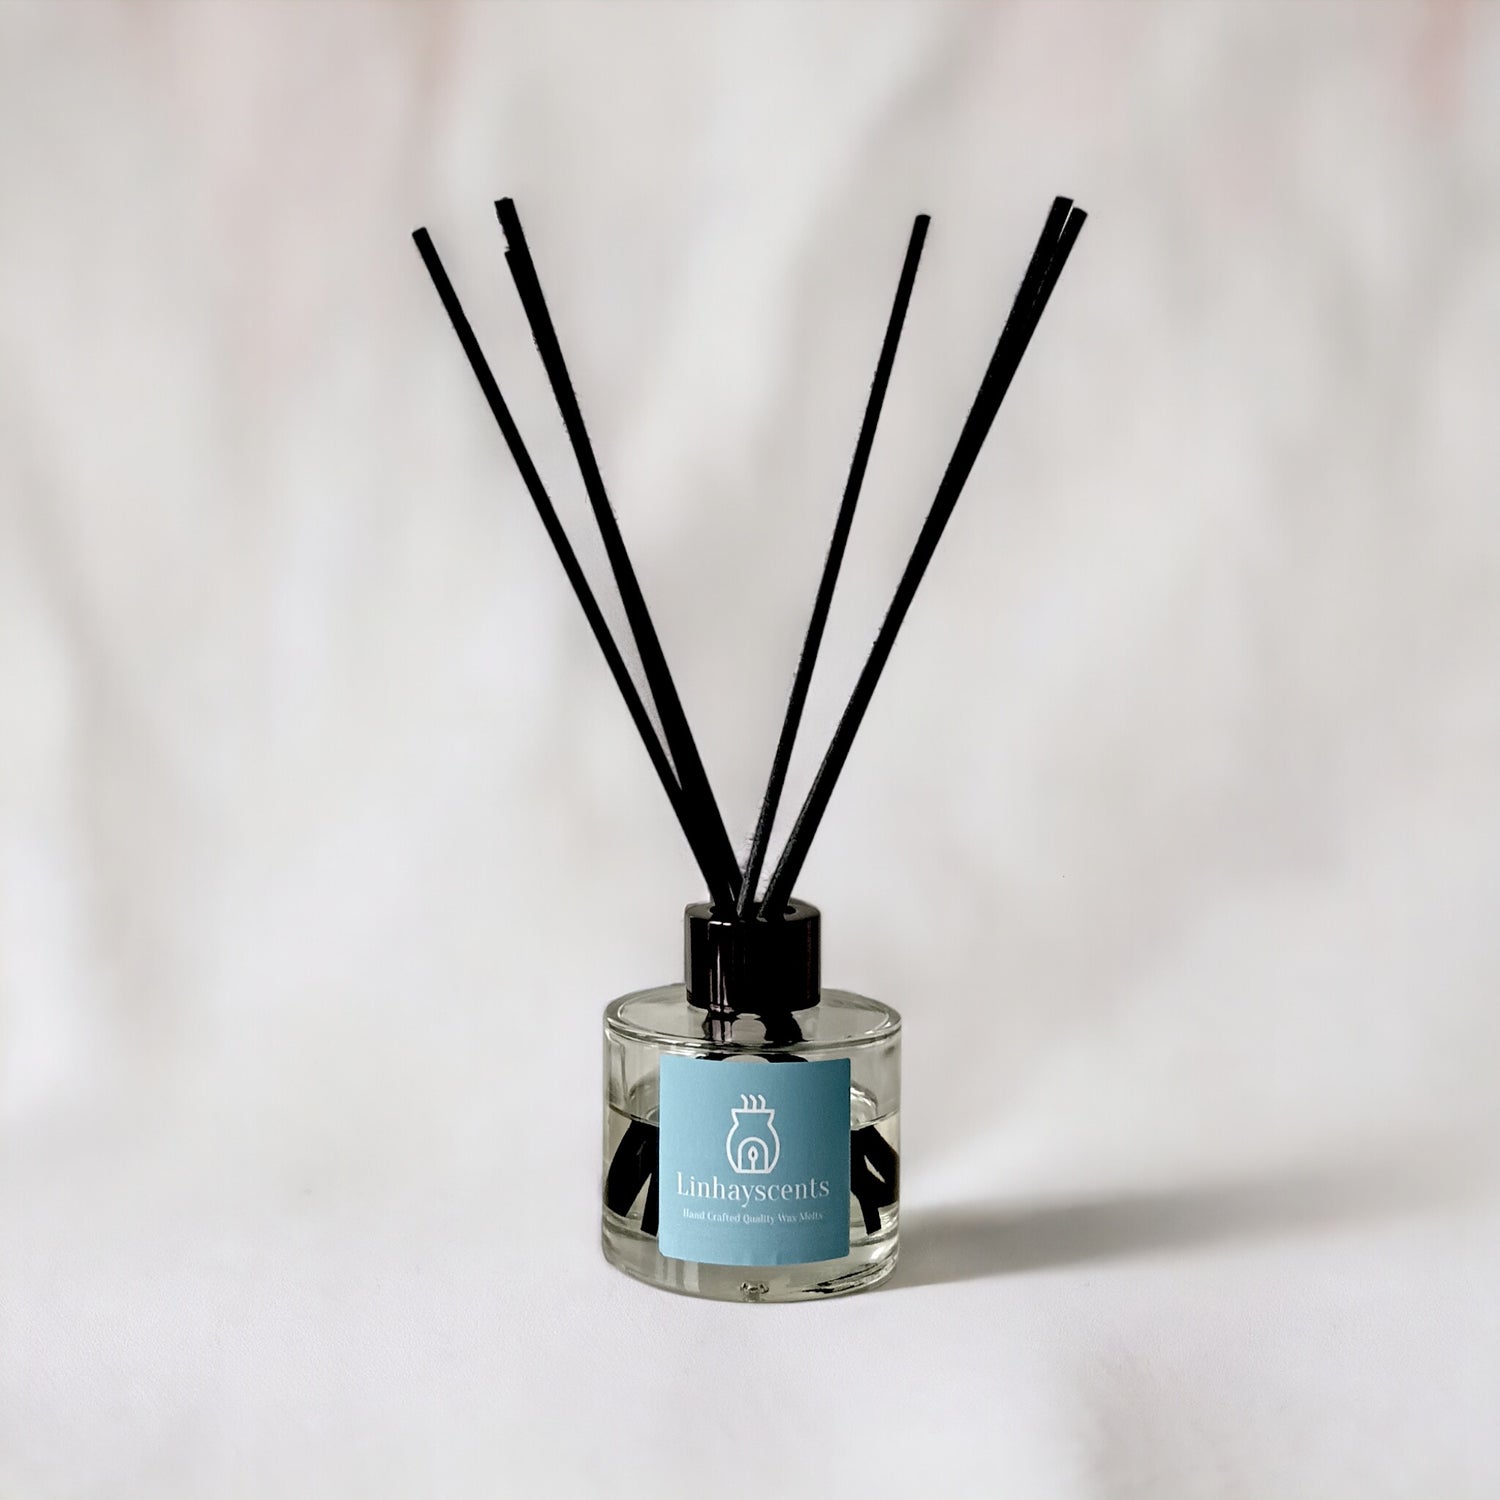 Reed Diffuser Collection